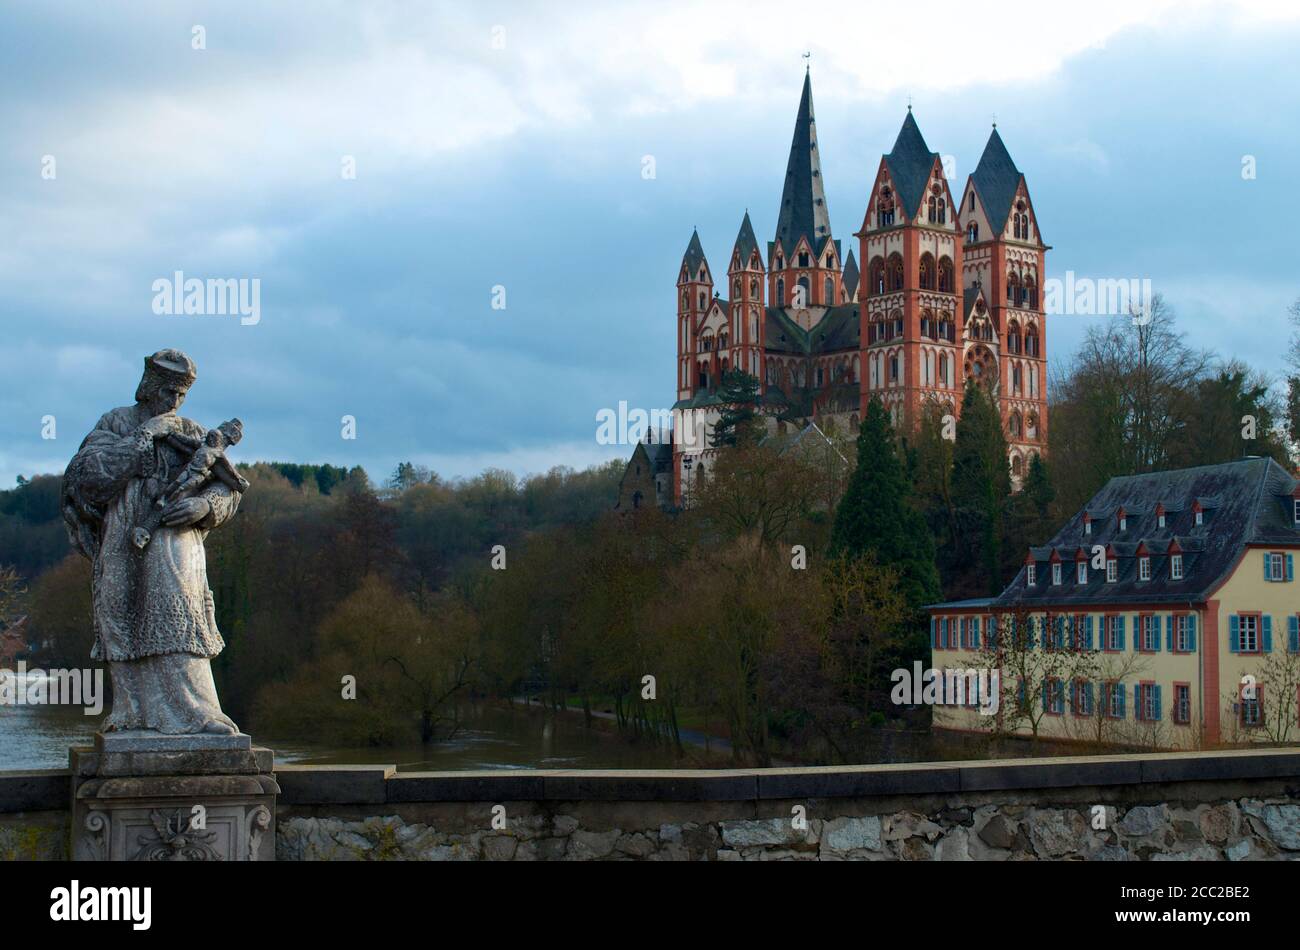 Germany, Hesse, View of Limburg cathedral with statue in front Stock Photo